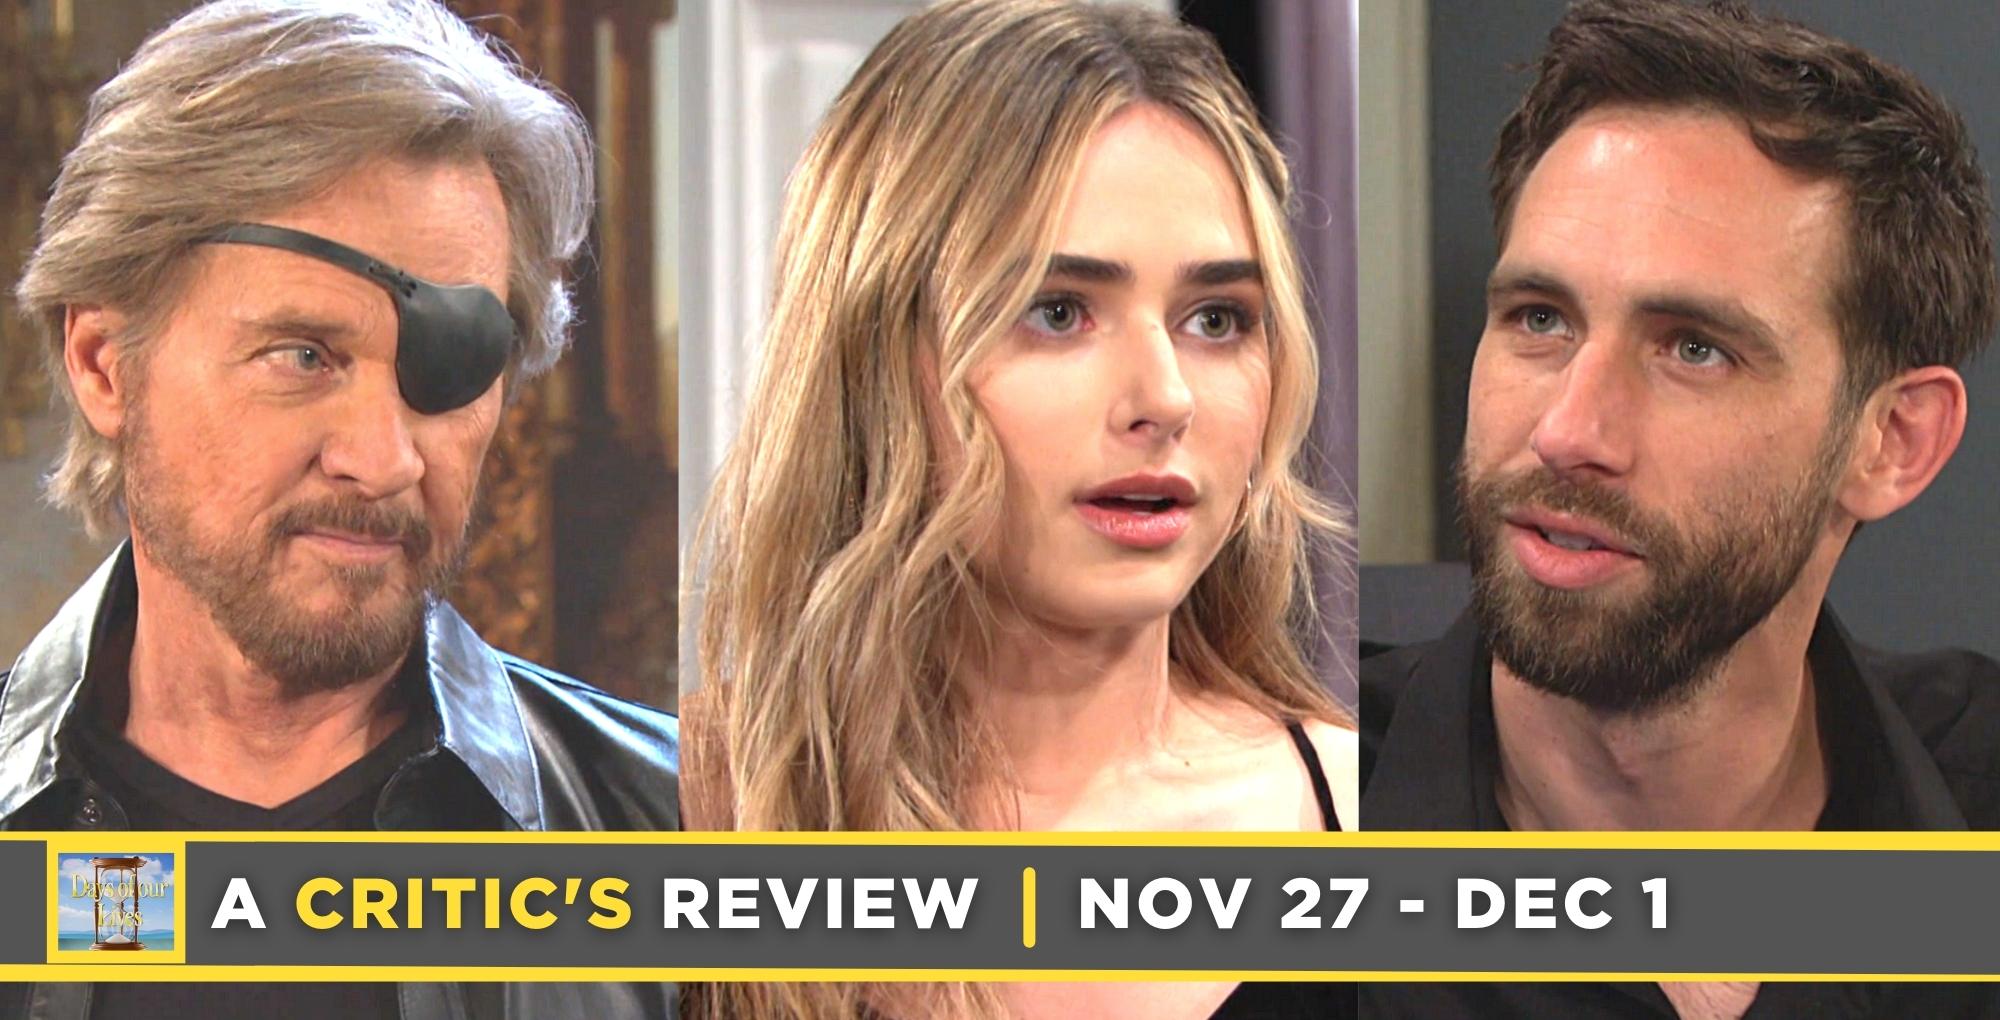 days of our lives critics review steve, holly, and everett.